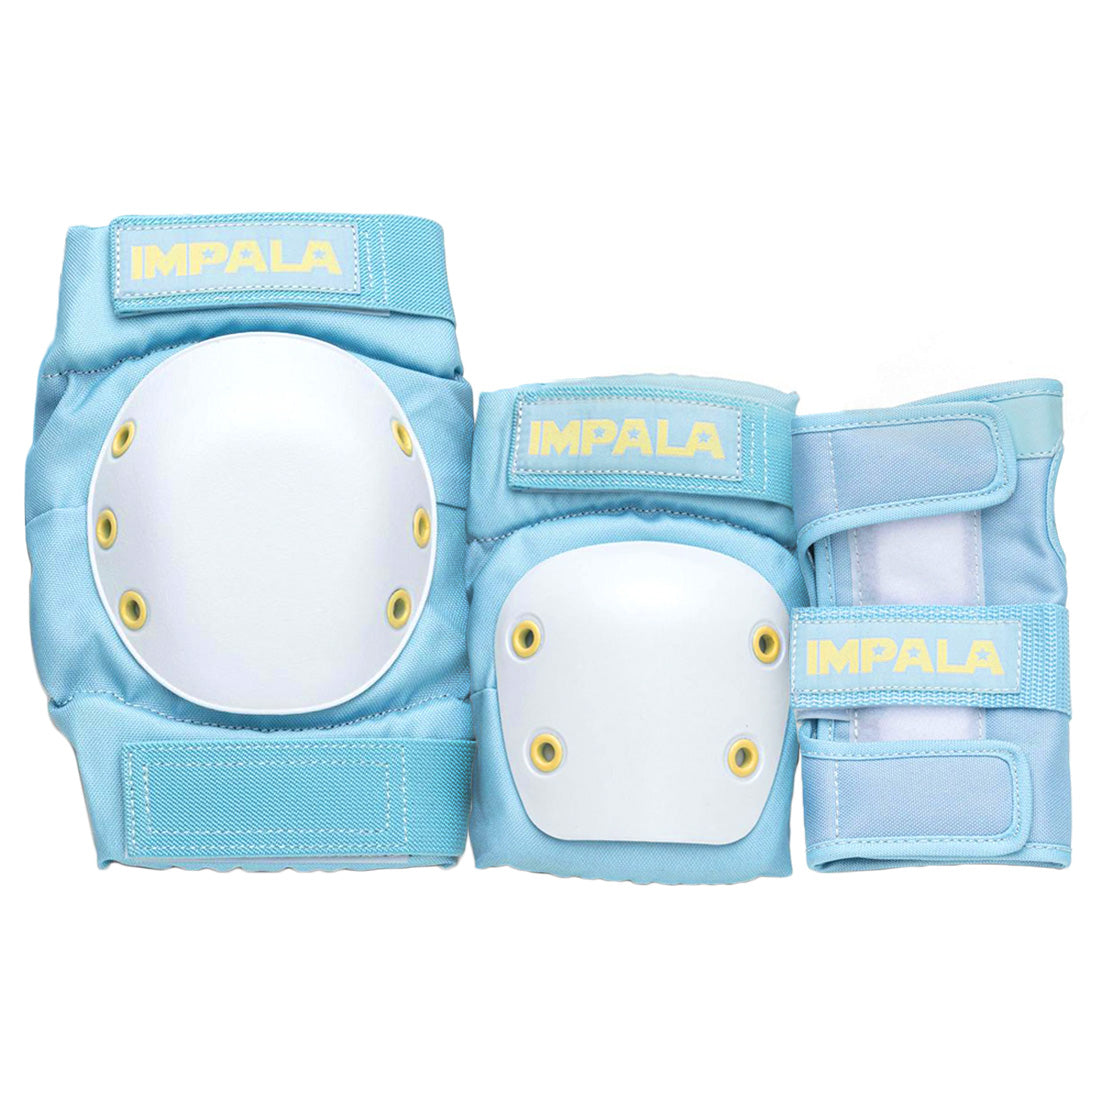 Impala Tri Pack Sky Blue/Yellow - Adult Protective Gear